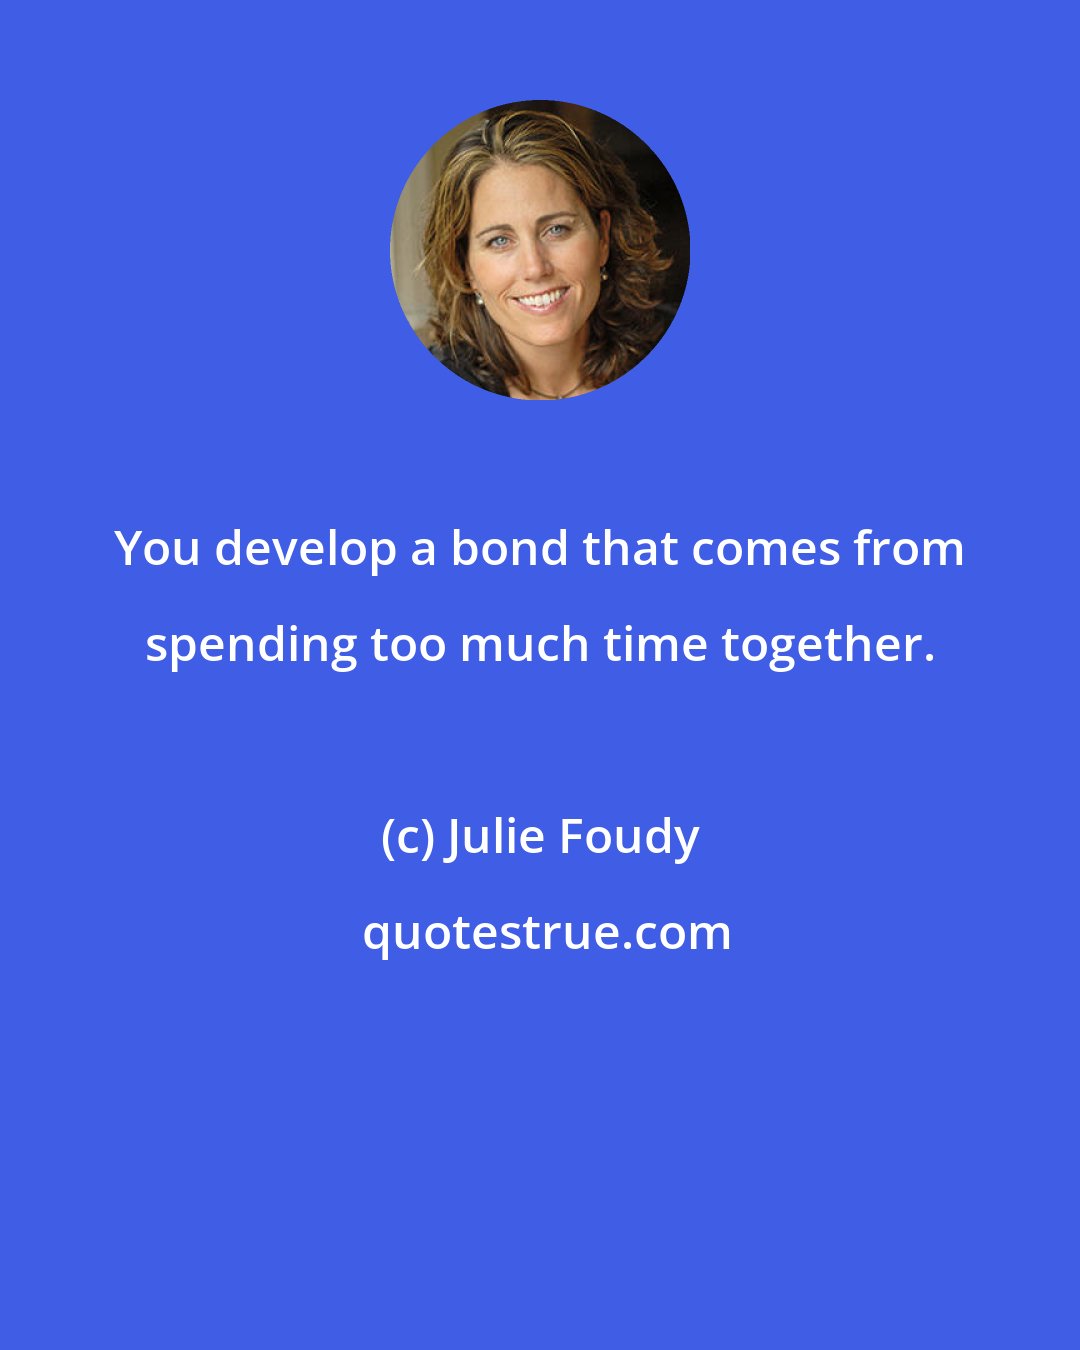 Julie Foudy: You develop a bond that comes from spending too much time together.